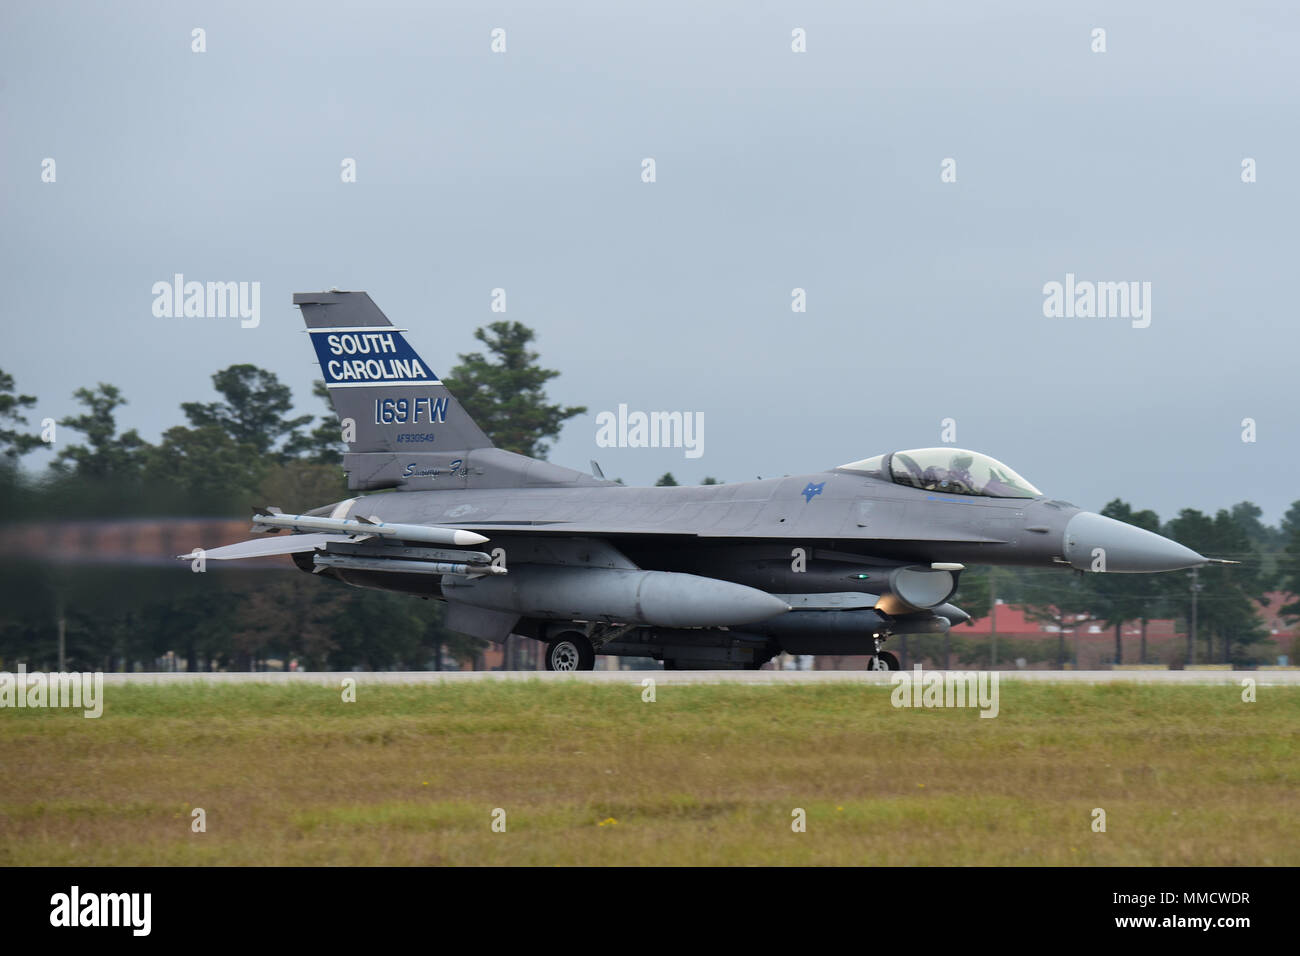 U.S. Air Force F-16 fighter jets from the South Carolina Air National Guard’s 169th Fighter Wing prepare for takeoff during end-of-runway operations at McEntire Joint National Guard Base, S.C., Oct. 14, 2017. This was part of routine training ensuring that the SCANG remains ready to accomplish the mission at a moment’s notice. (U.S. Air National Guard photo by Senior Airman Megan Floyd) Stock Photo